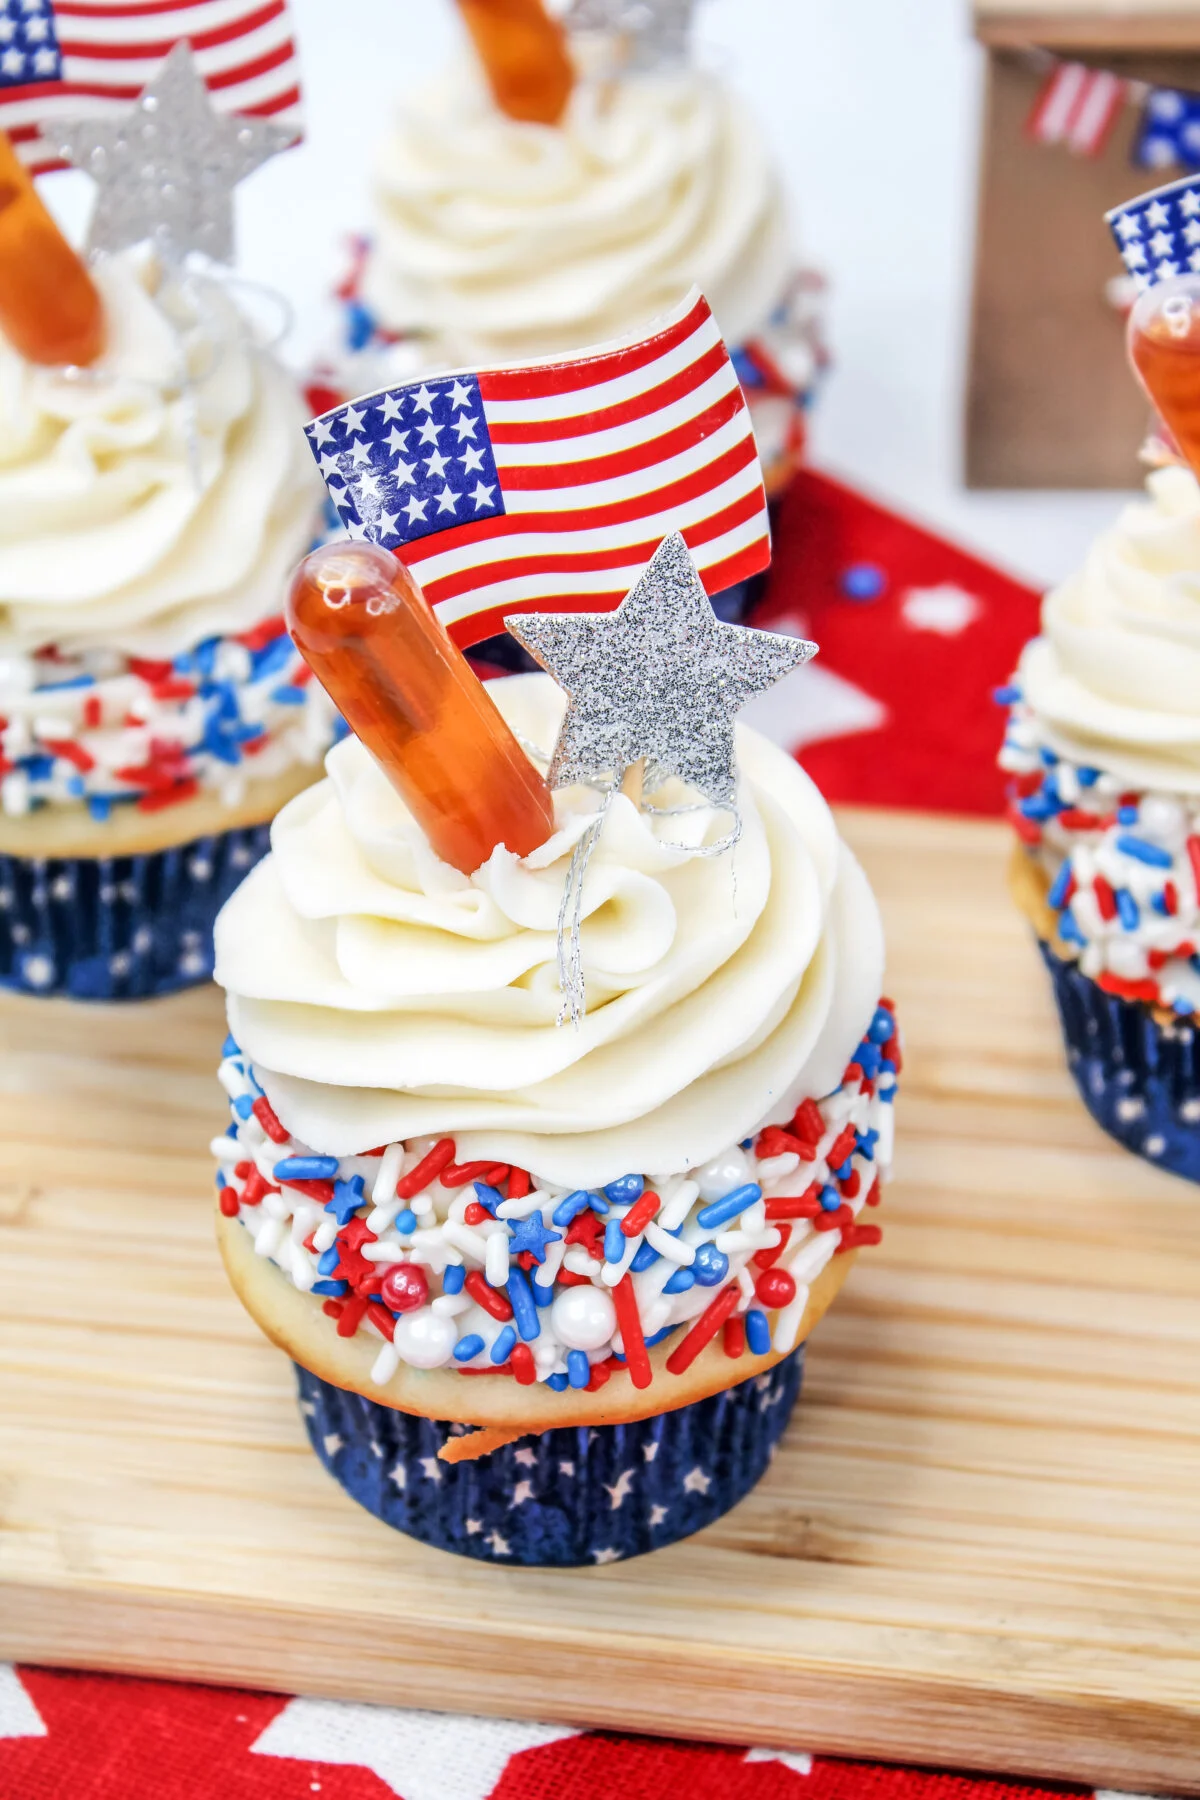 Celebrate America with this delicious and patriotic cupcake recipe! These American Honey Cupcakes are perfect for your next party or cookout.